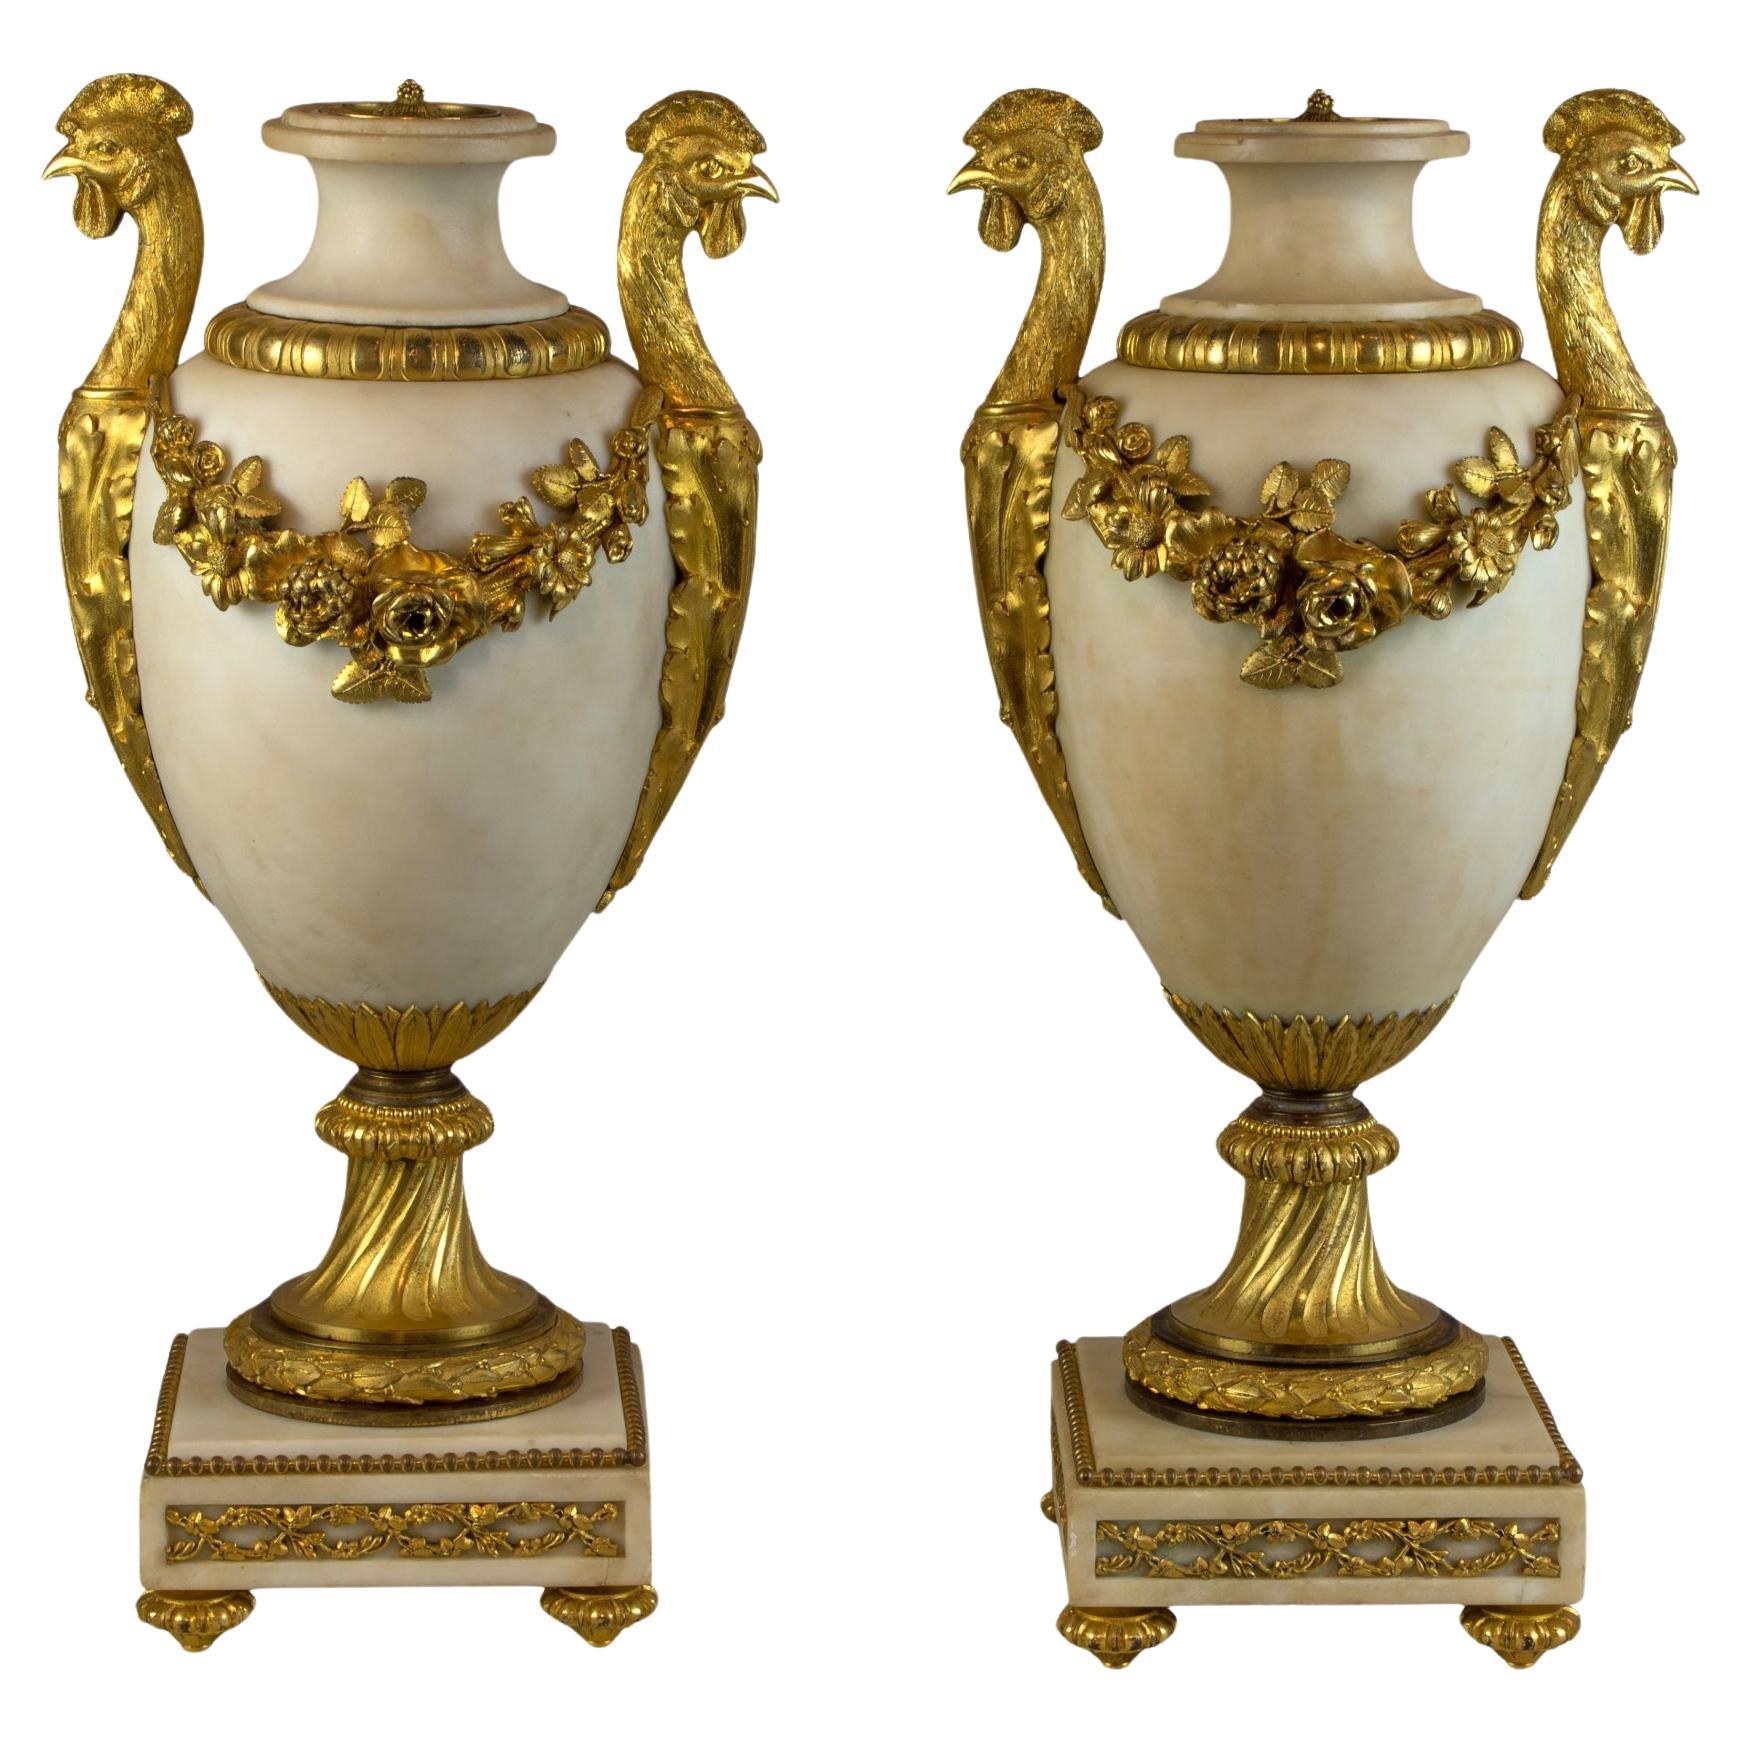 Magnificent Pair of Louis XVI Style Gilt-Bronze-Mounted White Marble Urns For Sale